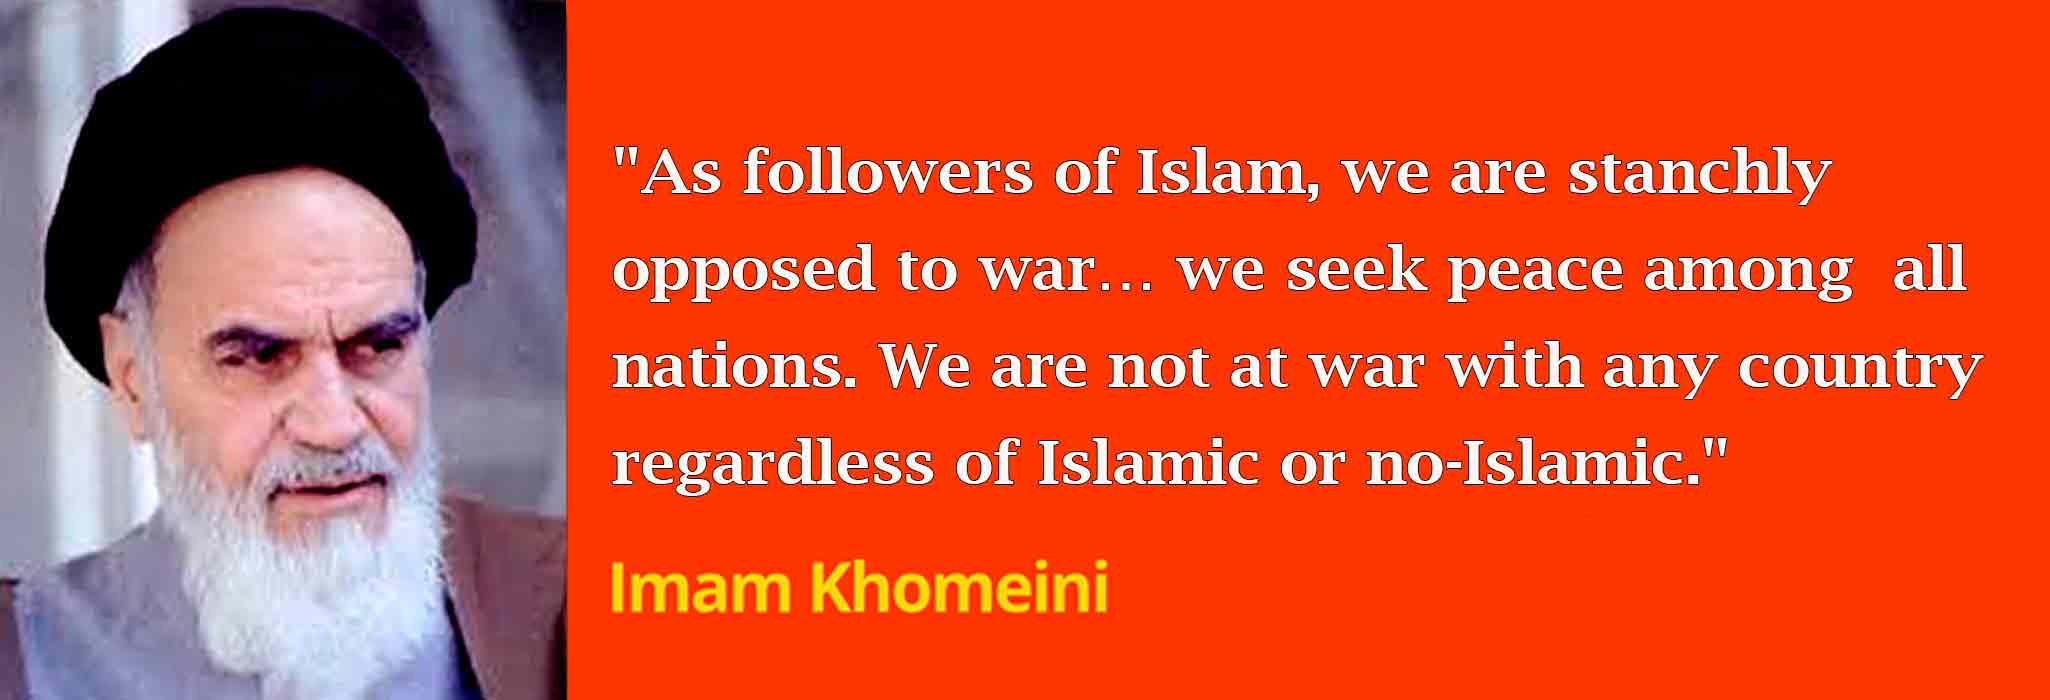 As followers of Islam, we are stanchly opposed to war.